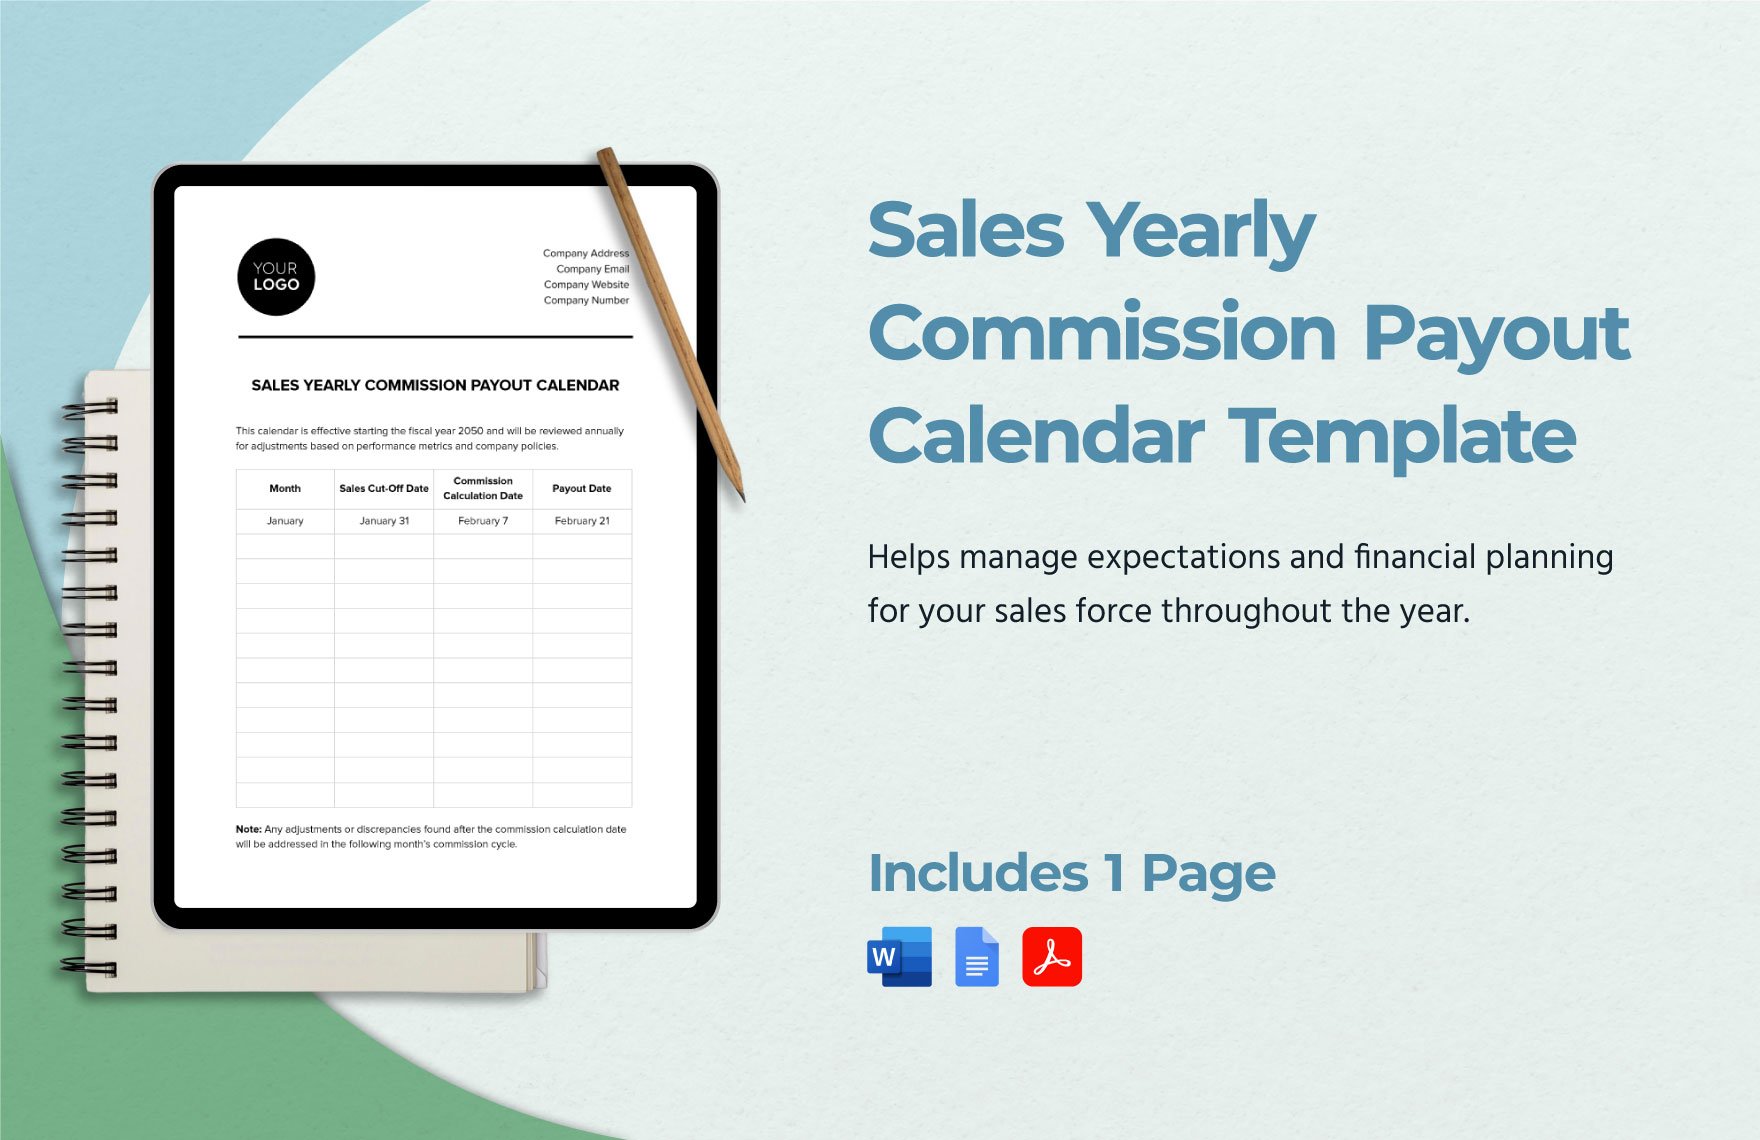 Sales Yearly Commission Payout Calendar Template